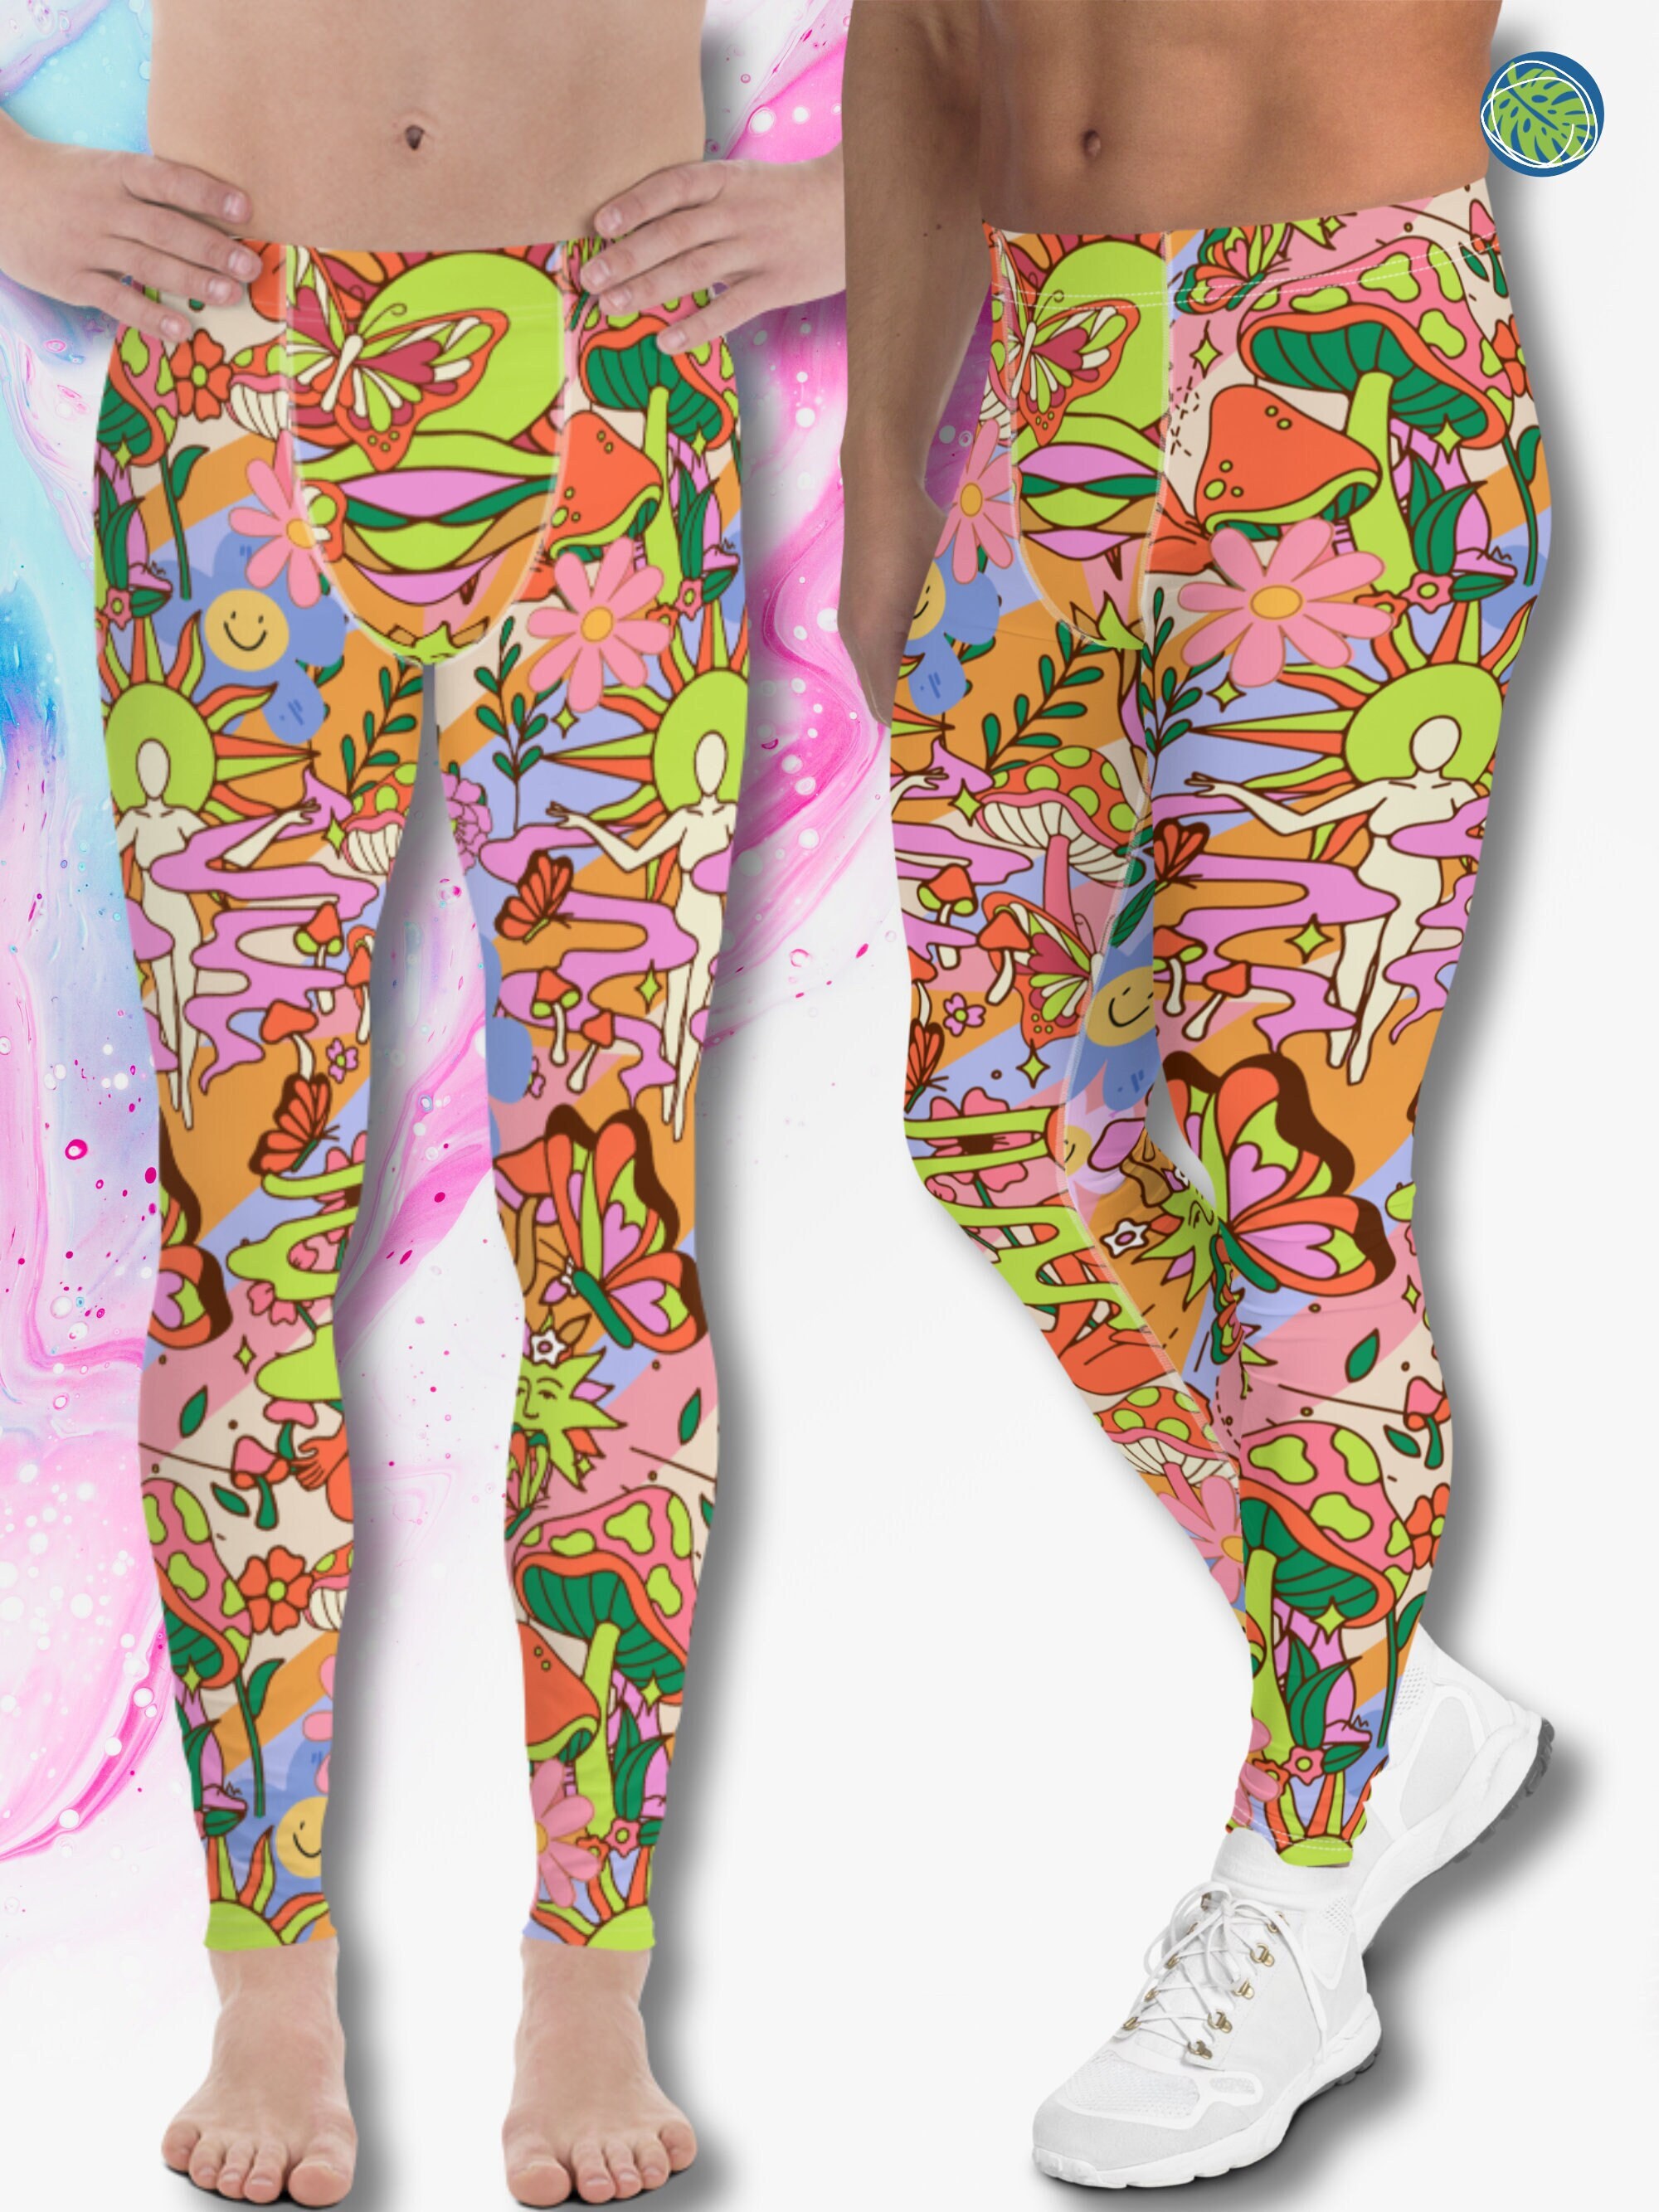 Groovy Flowers Yoga Leggings Women, 70s Retro Floral High Waisted Pants  Cute Printed Workout Gym Designer Tights